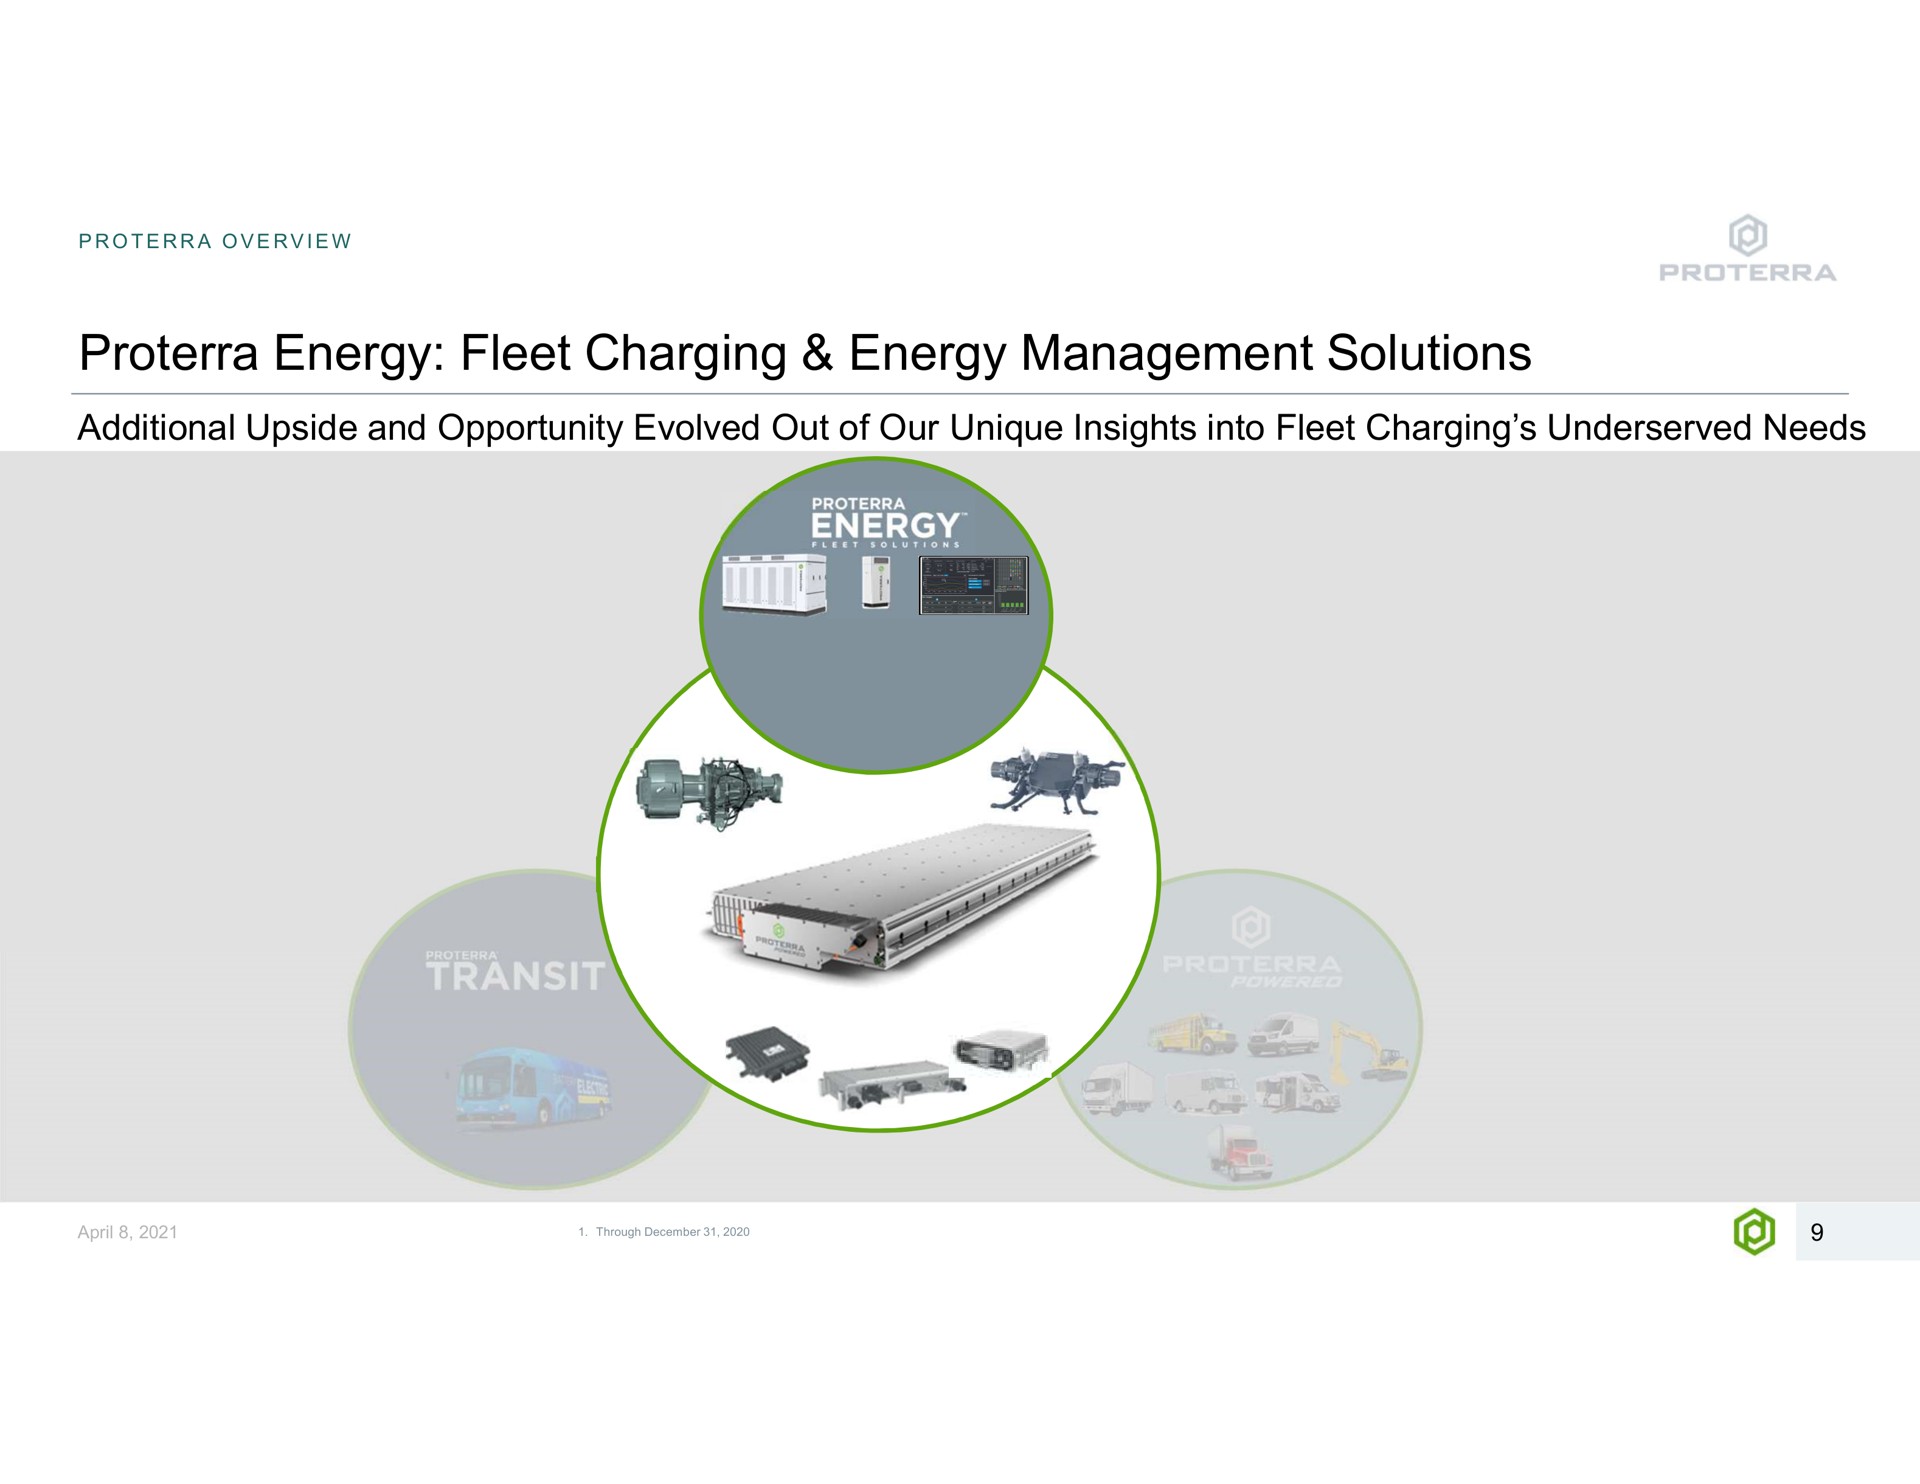 energy fleet charging energy management solutions overview additional upside and opportunity evolved out of our unique insights into needs | Proterra